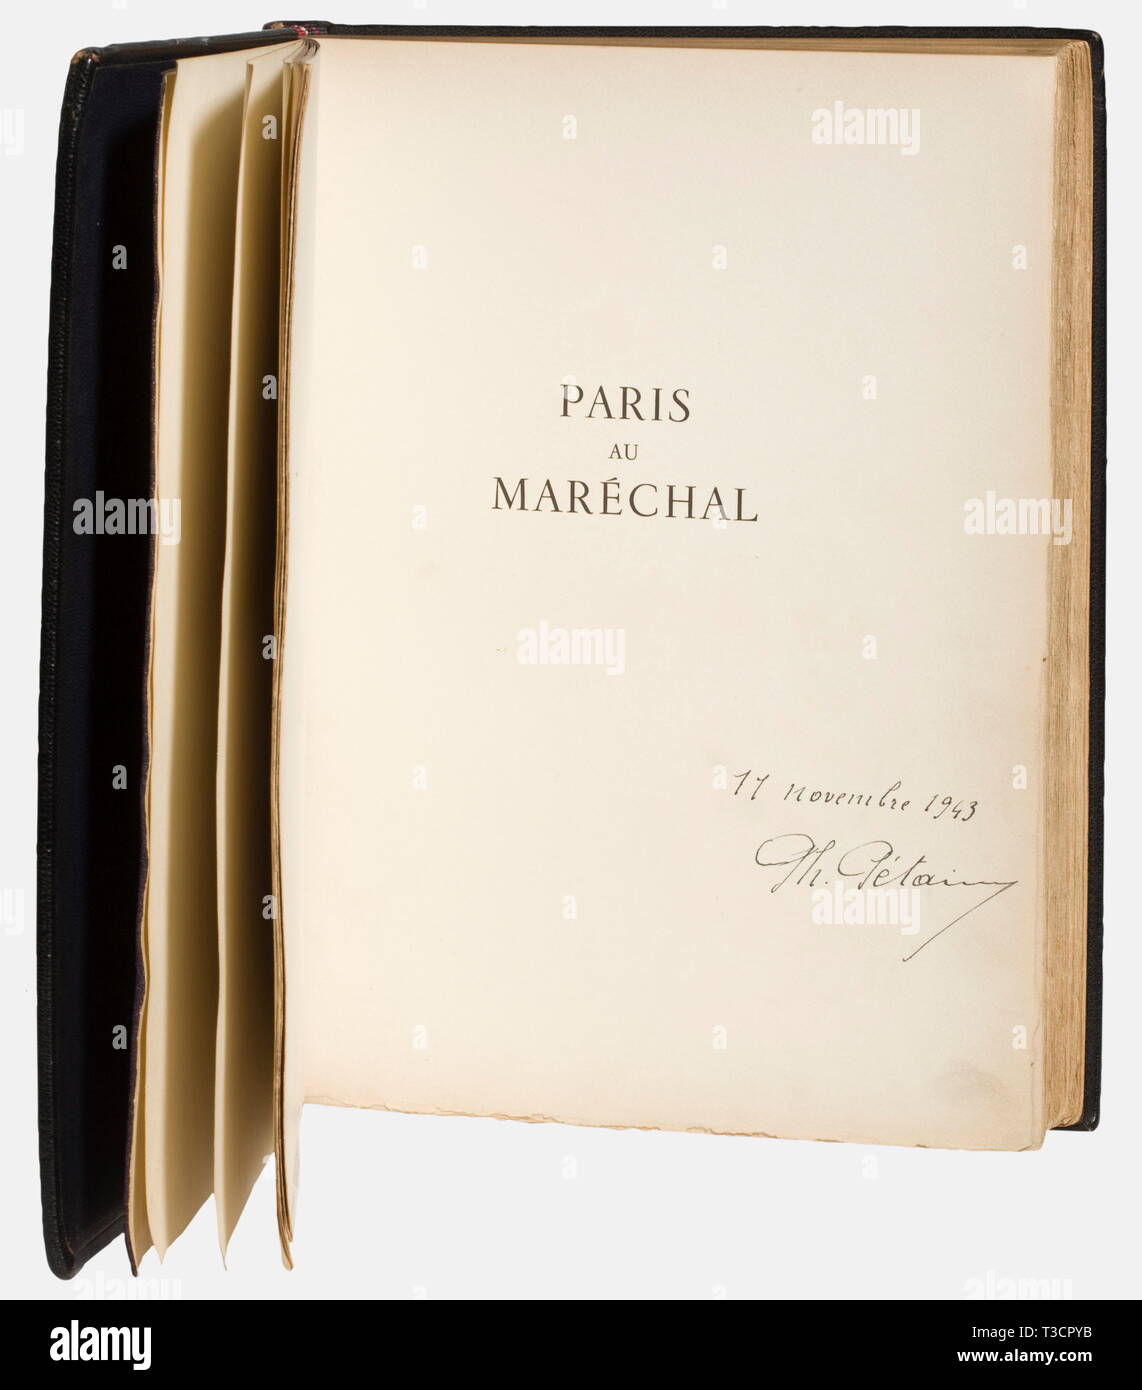 Marshal Philippe Pétain (1856 - 1951), a presentation book from the City of Paris 'Paris au Maréchal' A personal gift from Pétain as Head of State to the Argentine Ambassador to Vichy, Ricardo Olivera in 1943. Large format, 153 pages, numerous plates with engravings, among others by Jacquemin and Cottert, and biographical descriptions of the Marshal's postings in Paris. Dark blue binding of Morocco leather stamped with gold monogram 'PP' and the Francisca. The gift inscription to the ambassador dated '25 Mai 1943' stamped in gold on the inside of the dust, No-Exclusive-Use | Editorial-Use-Only Stock Photo